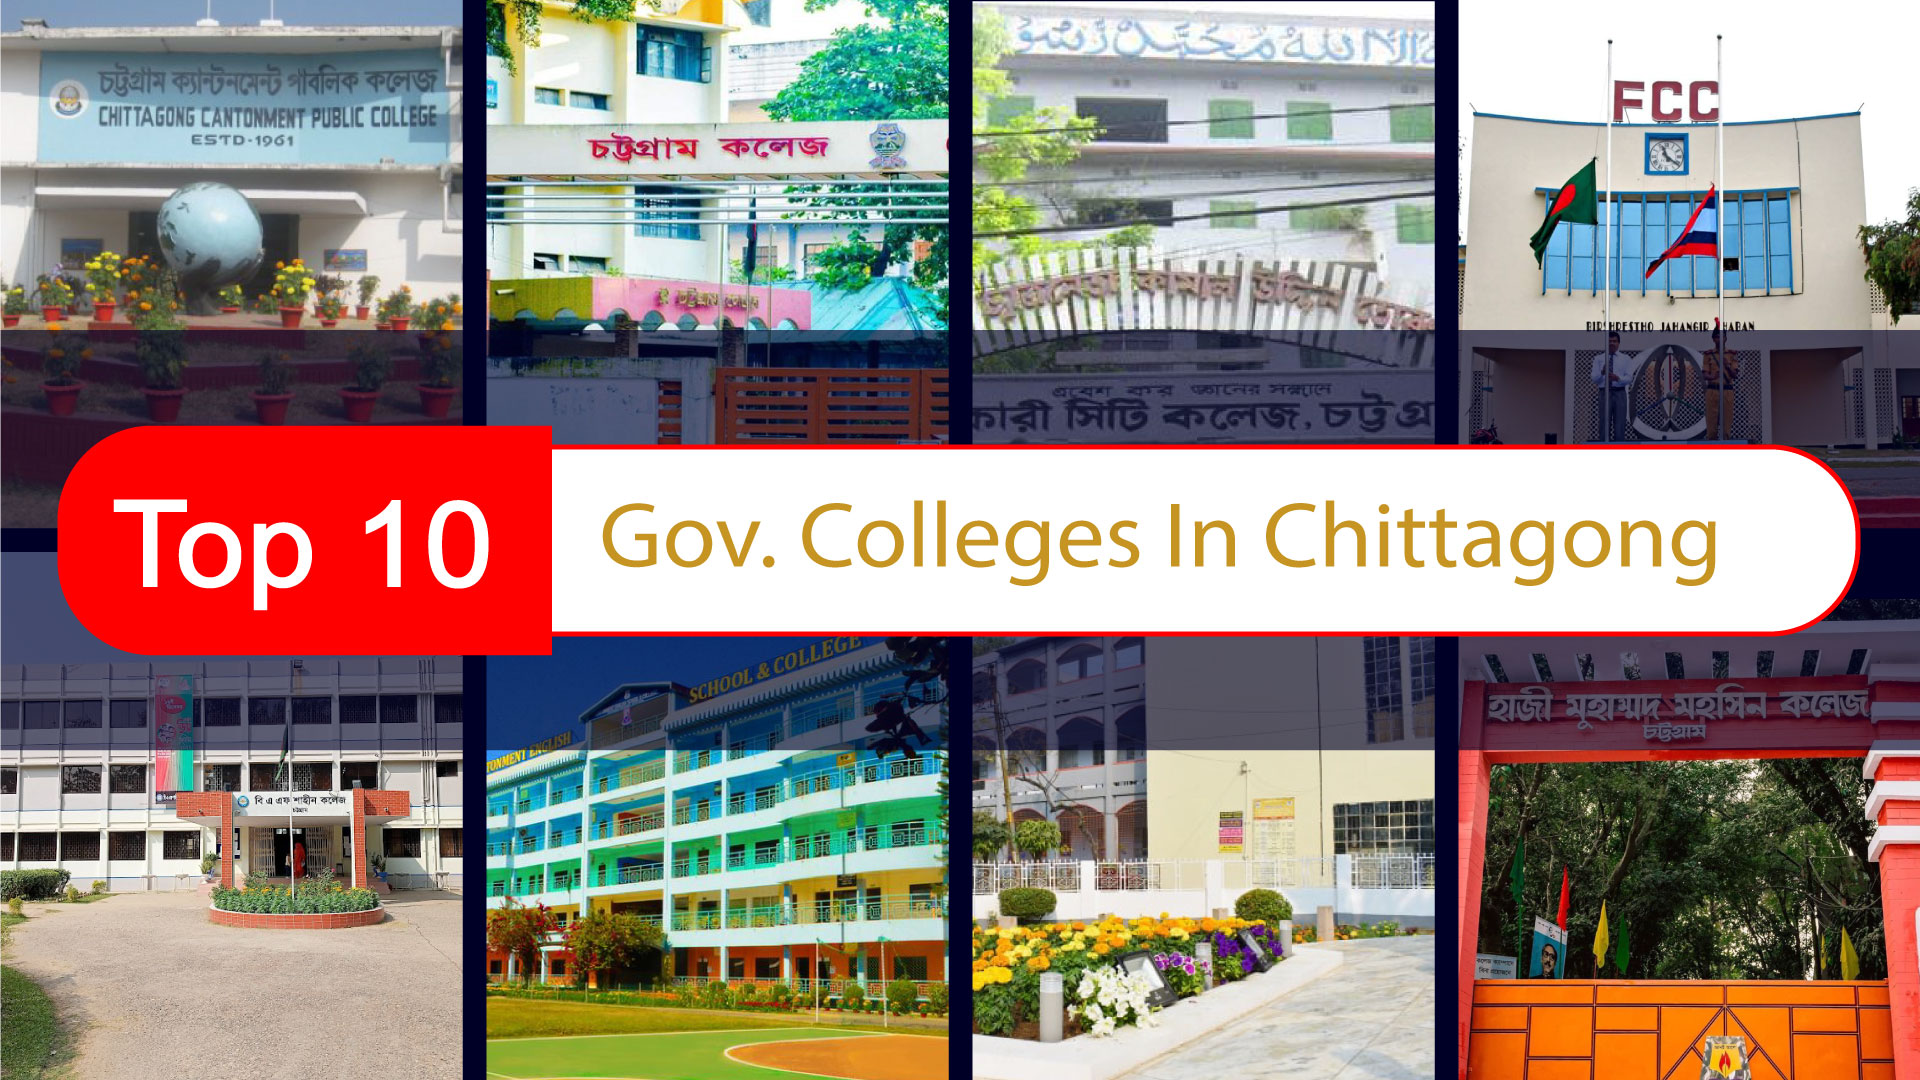 Top 10 Government Colleges in Chattogram